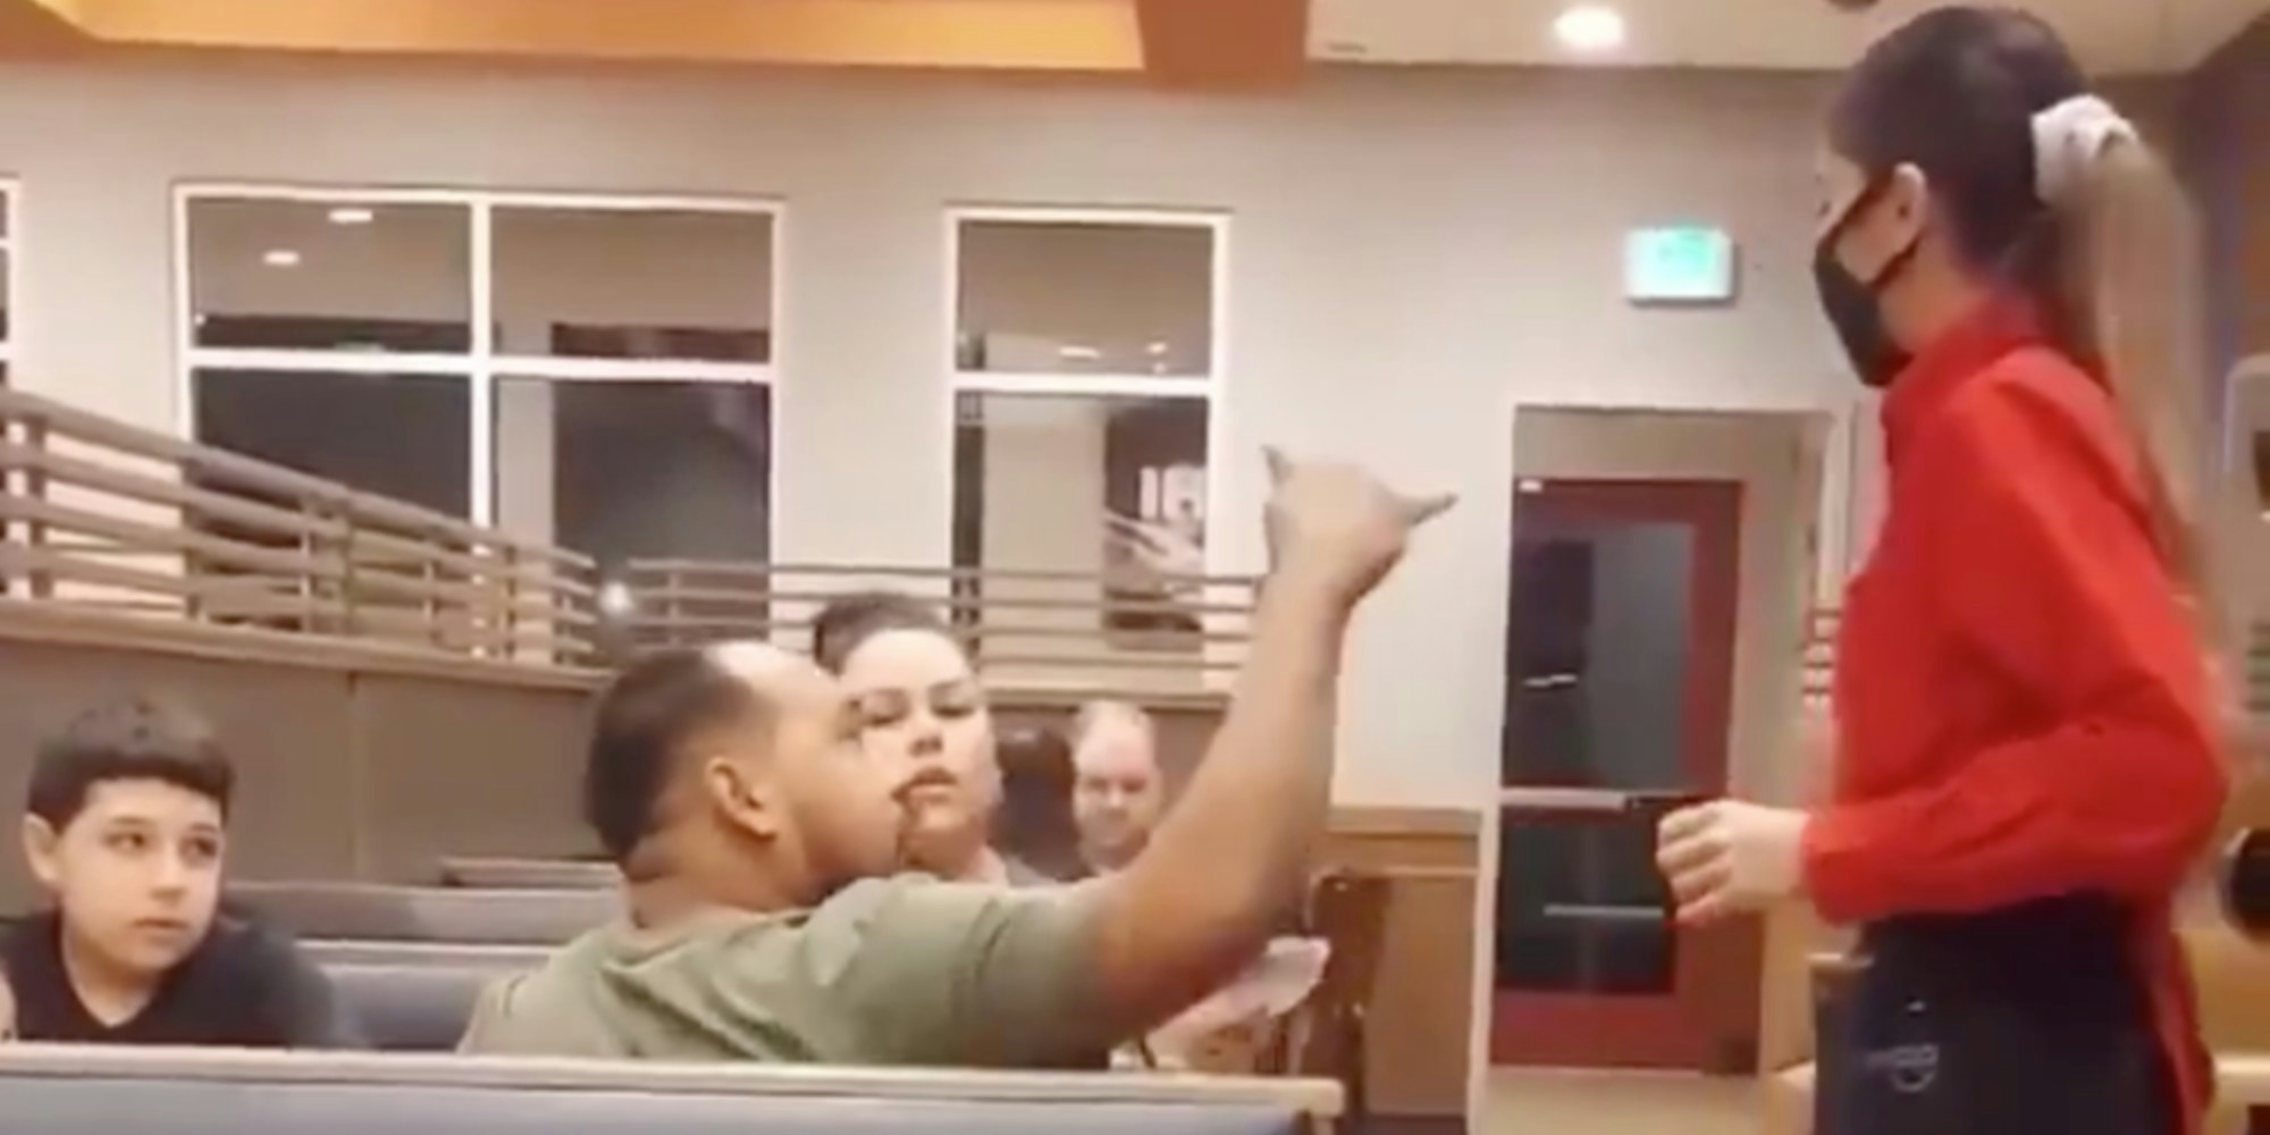 A man yelling at a woman in Ihop